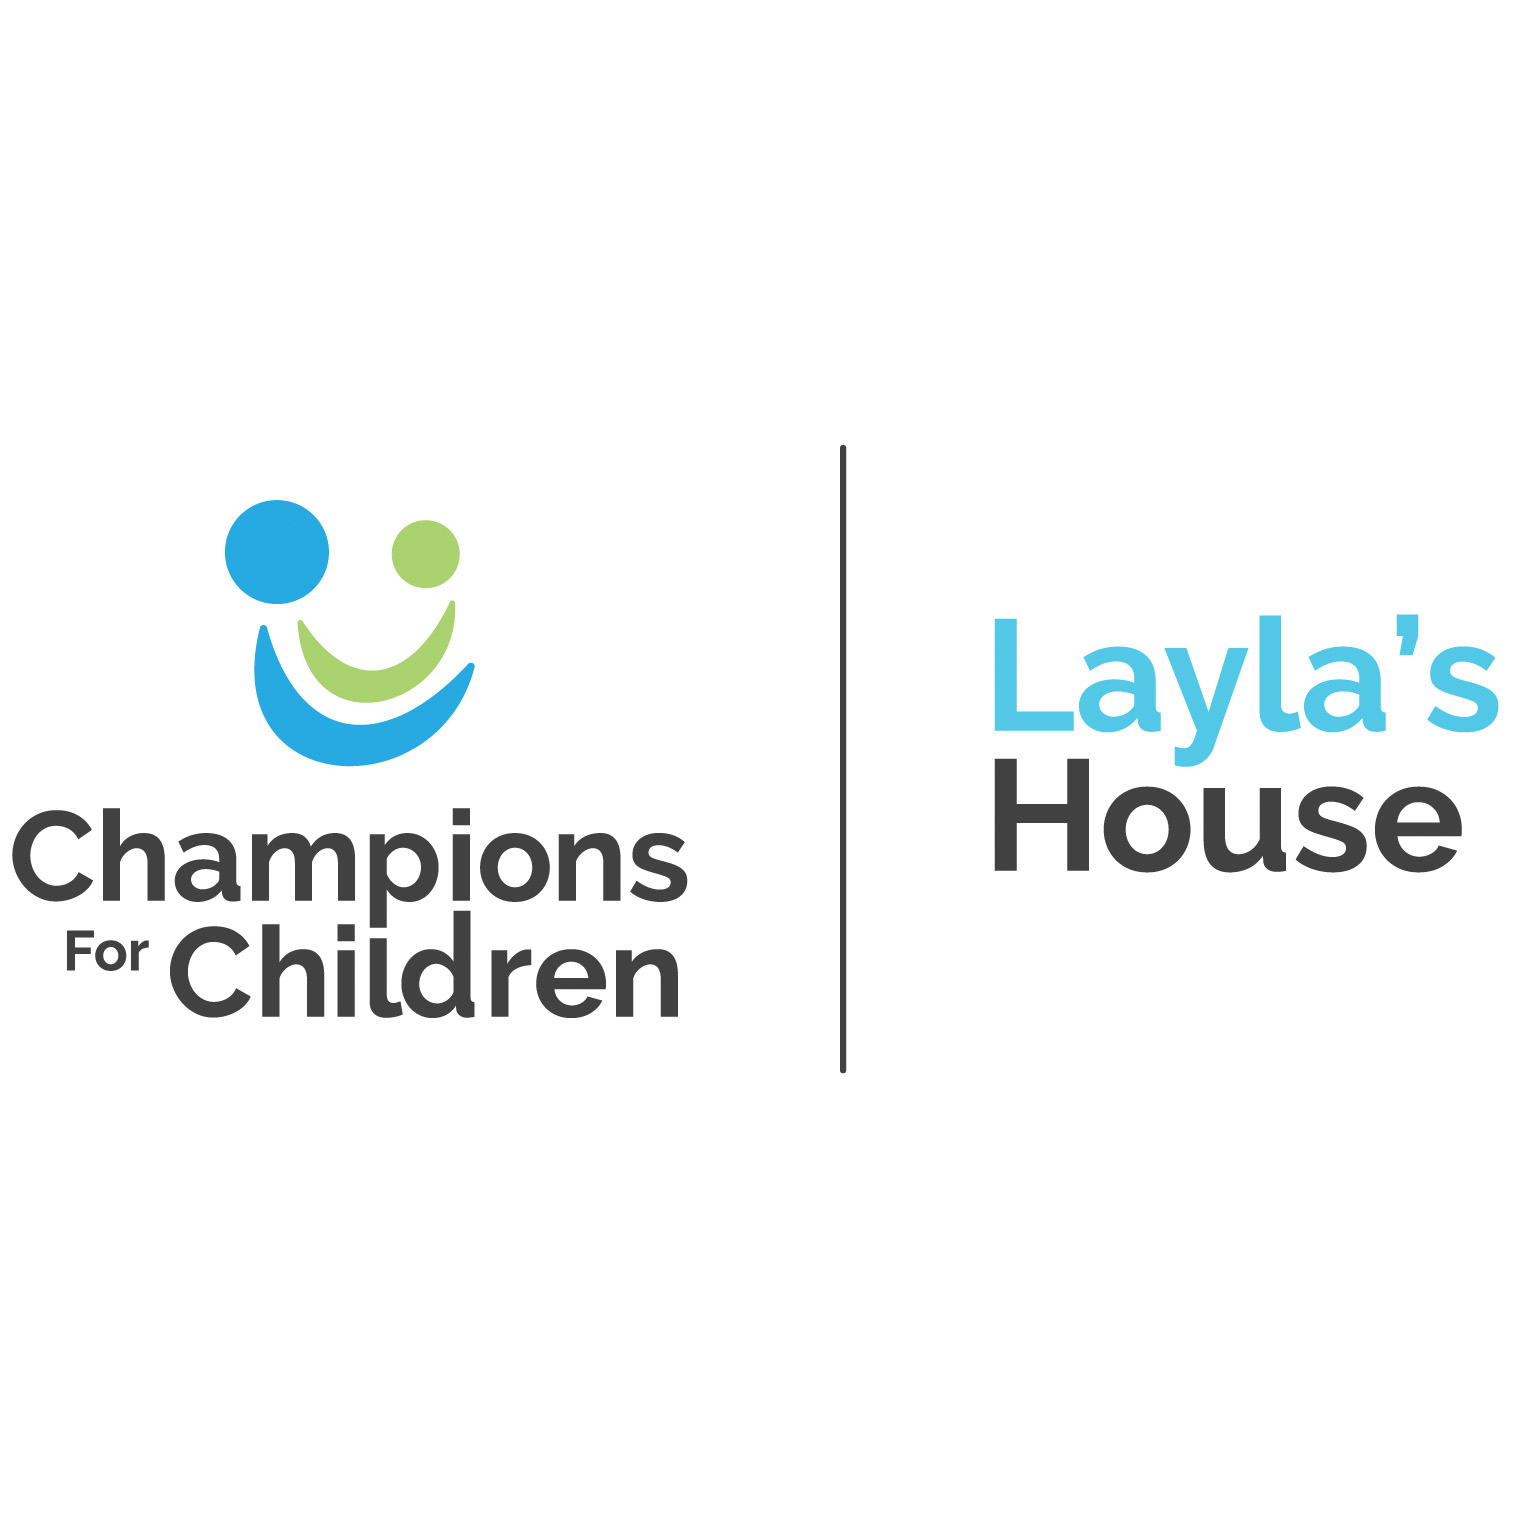 Champions for Children Layla's House logo